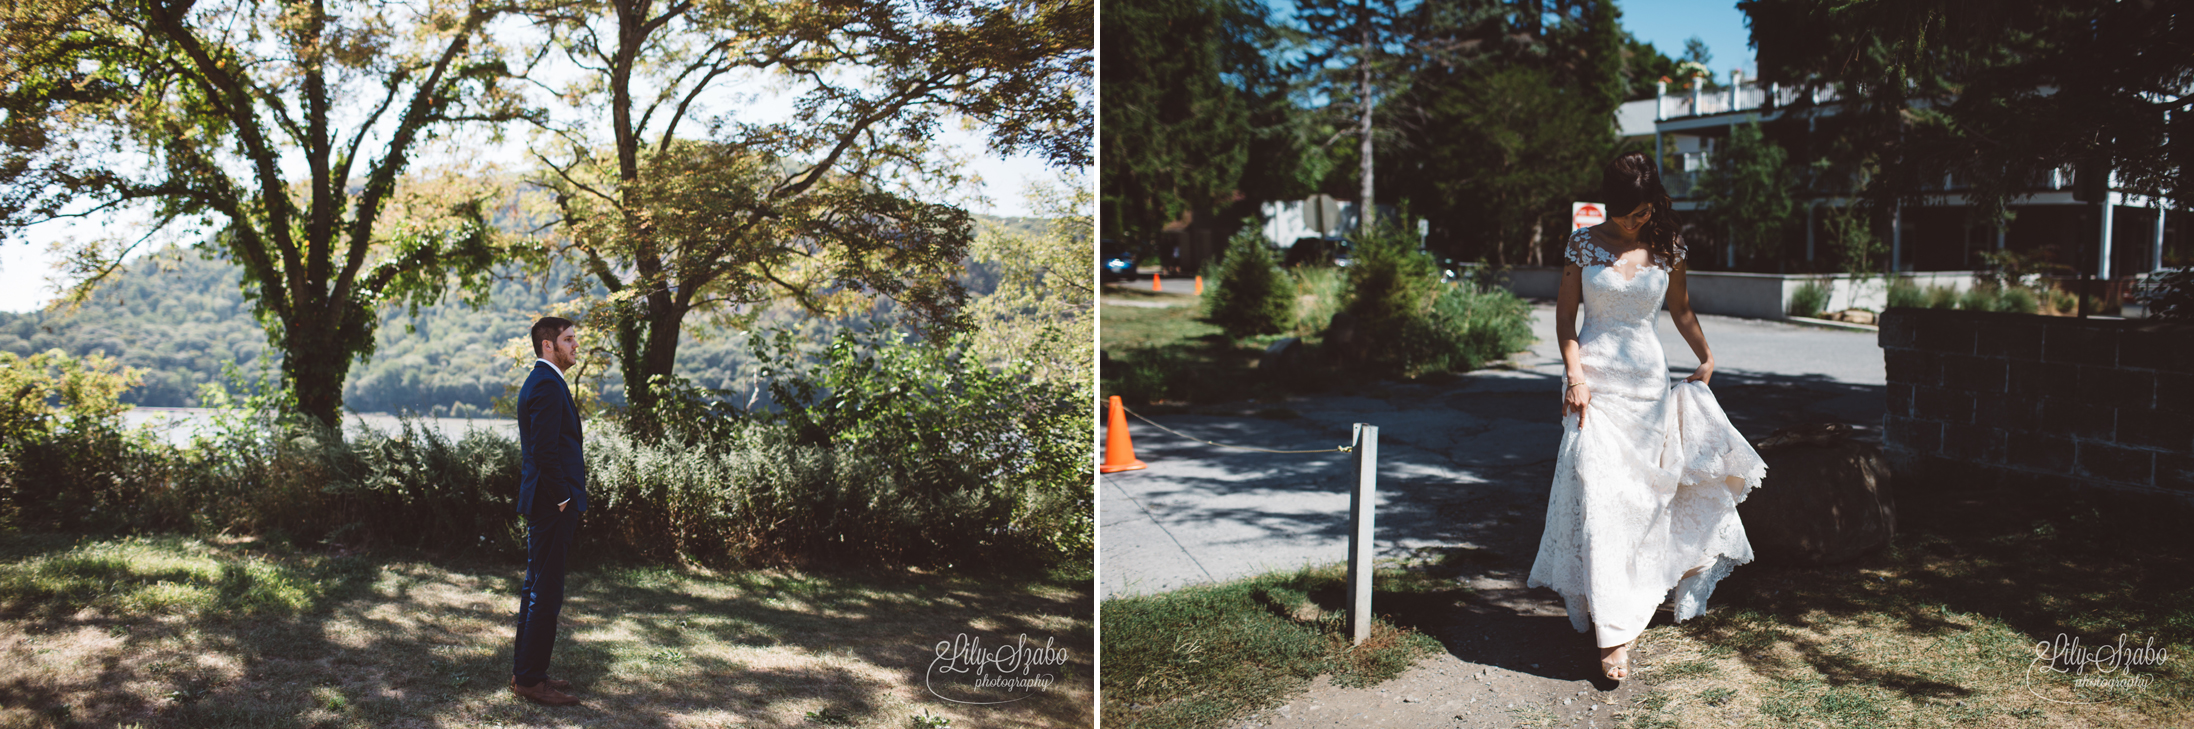 094-wes-anderson-highlands-country-club-wedding-in-garrison-ny